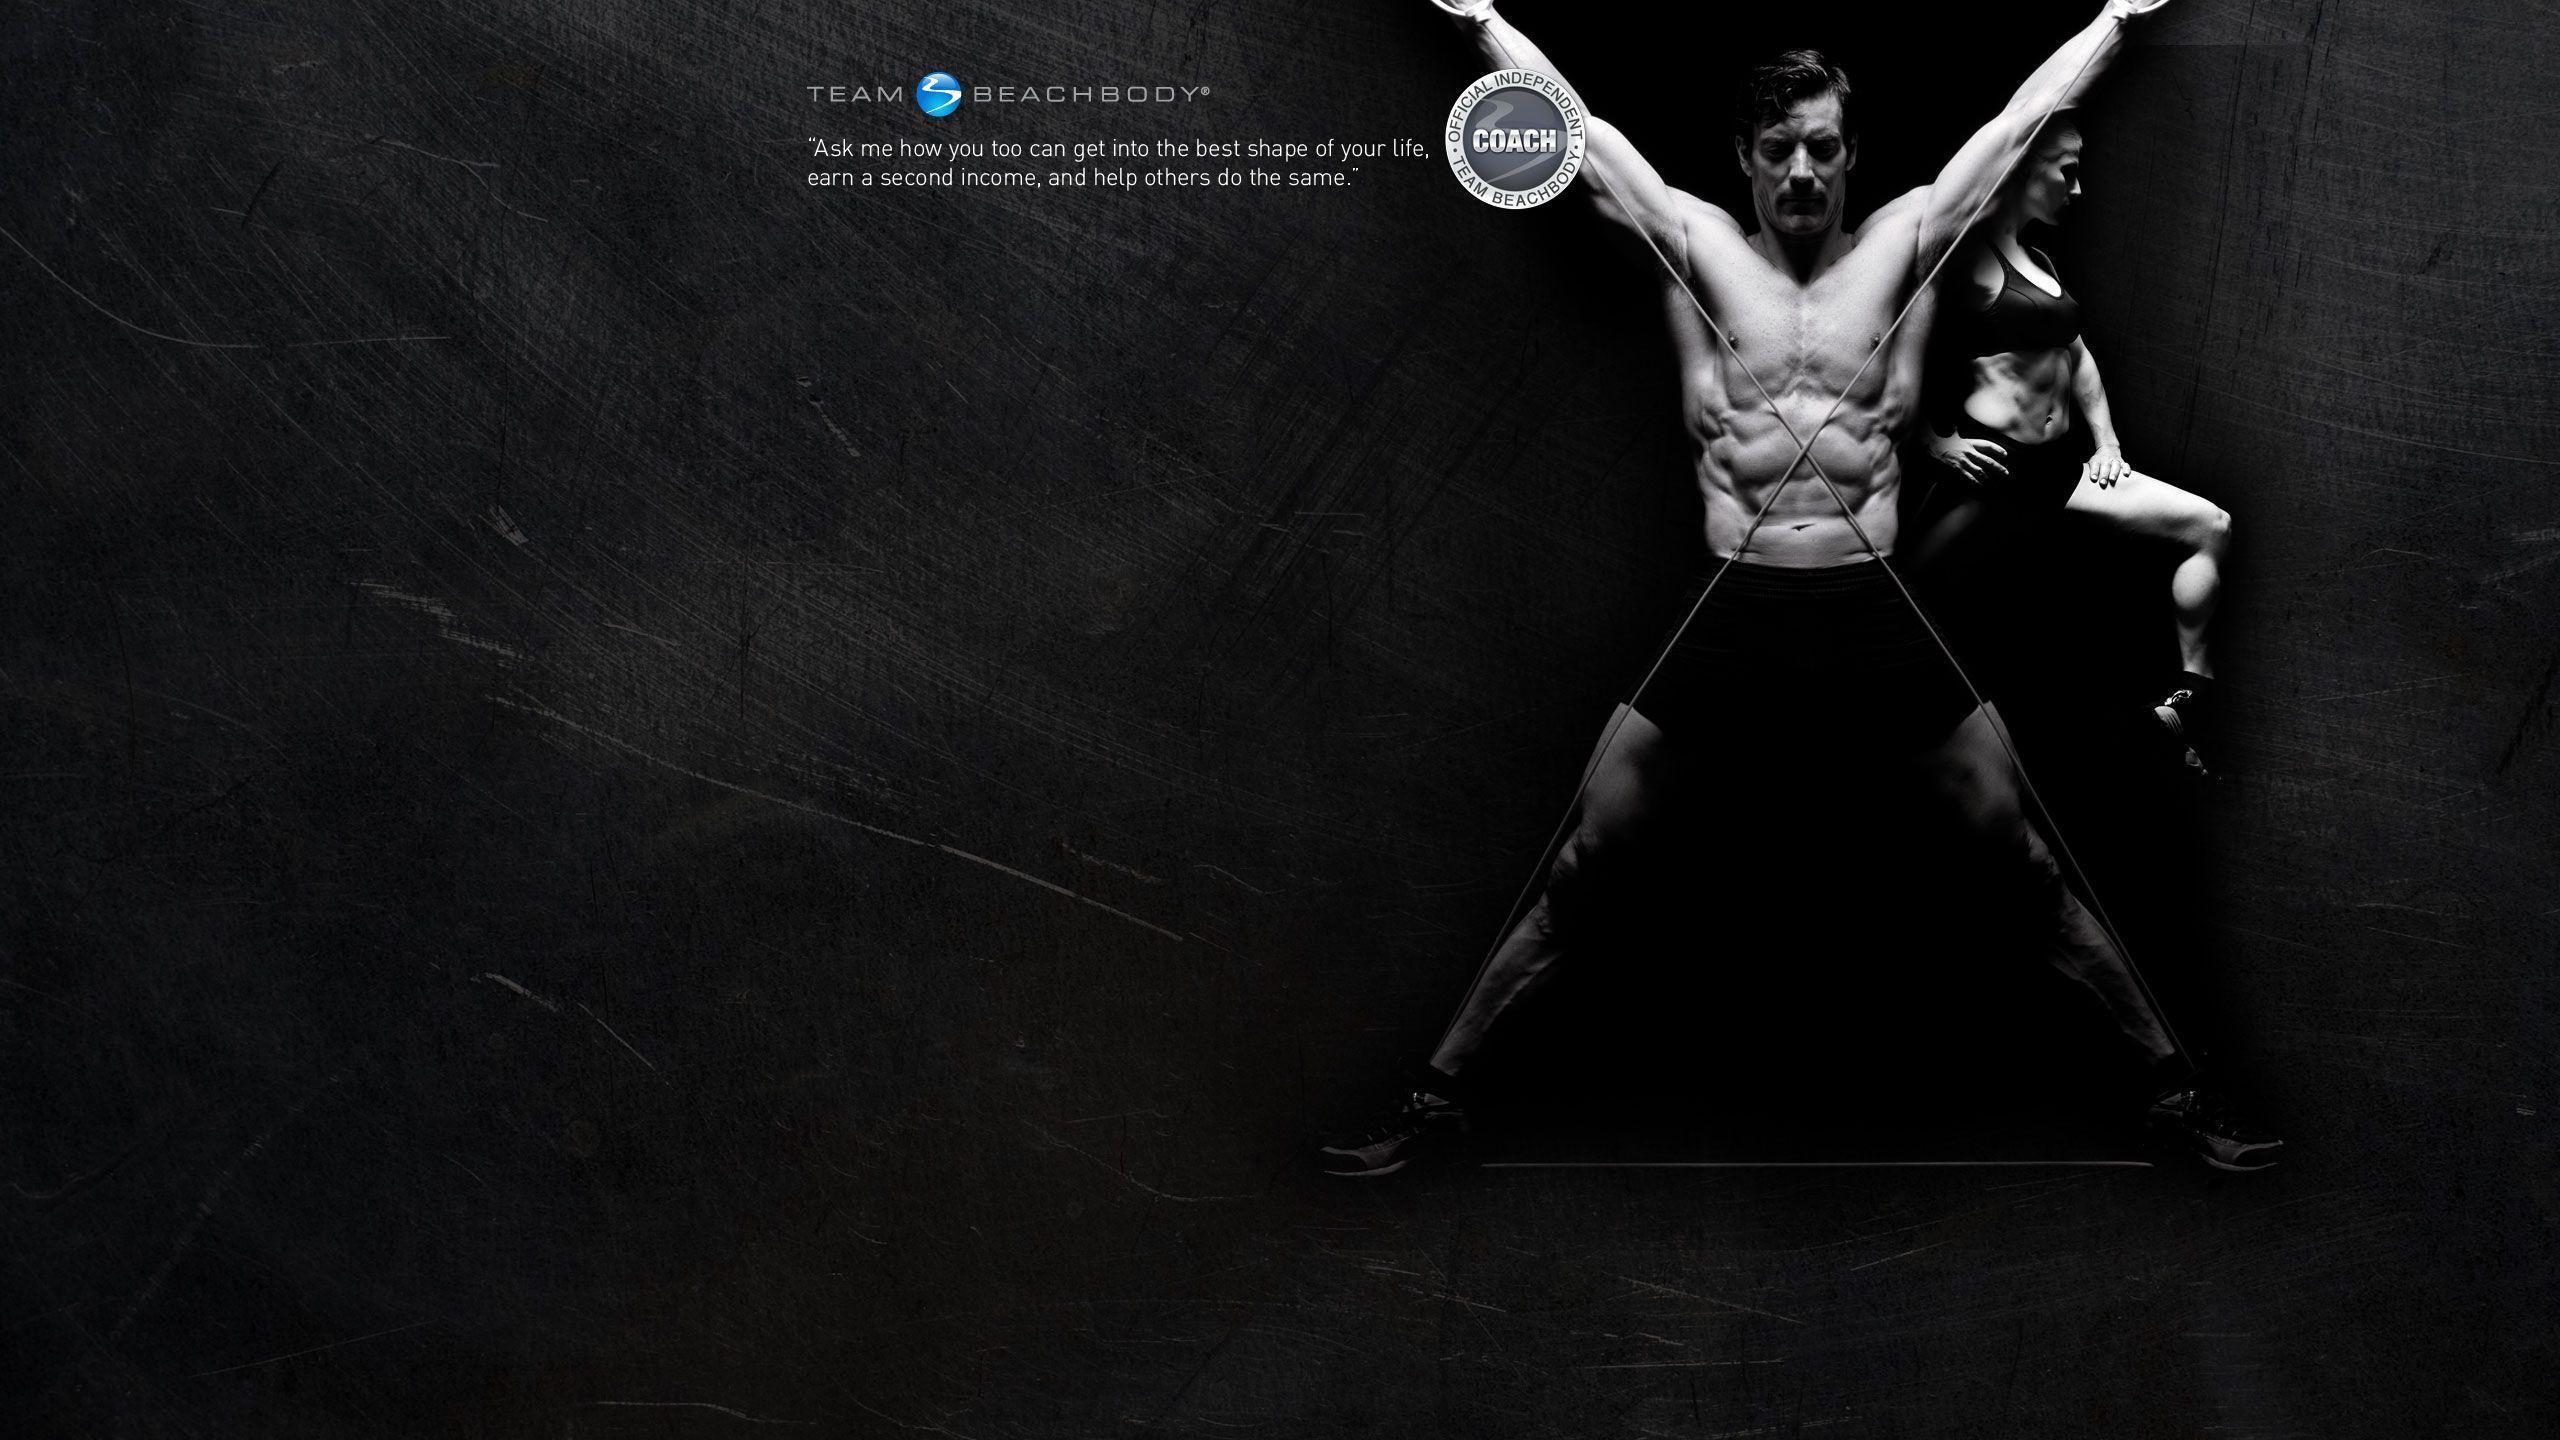 P90X Wallpapers 2560x1440